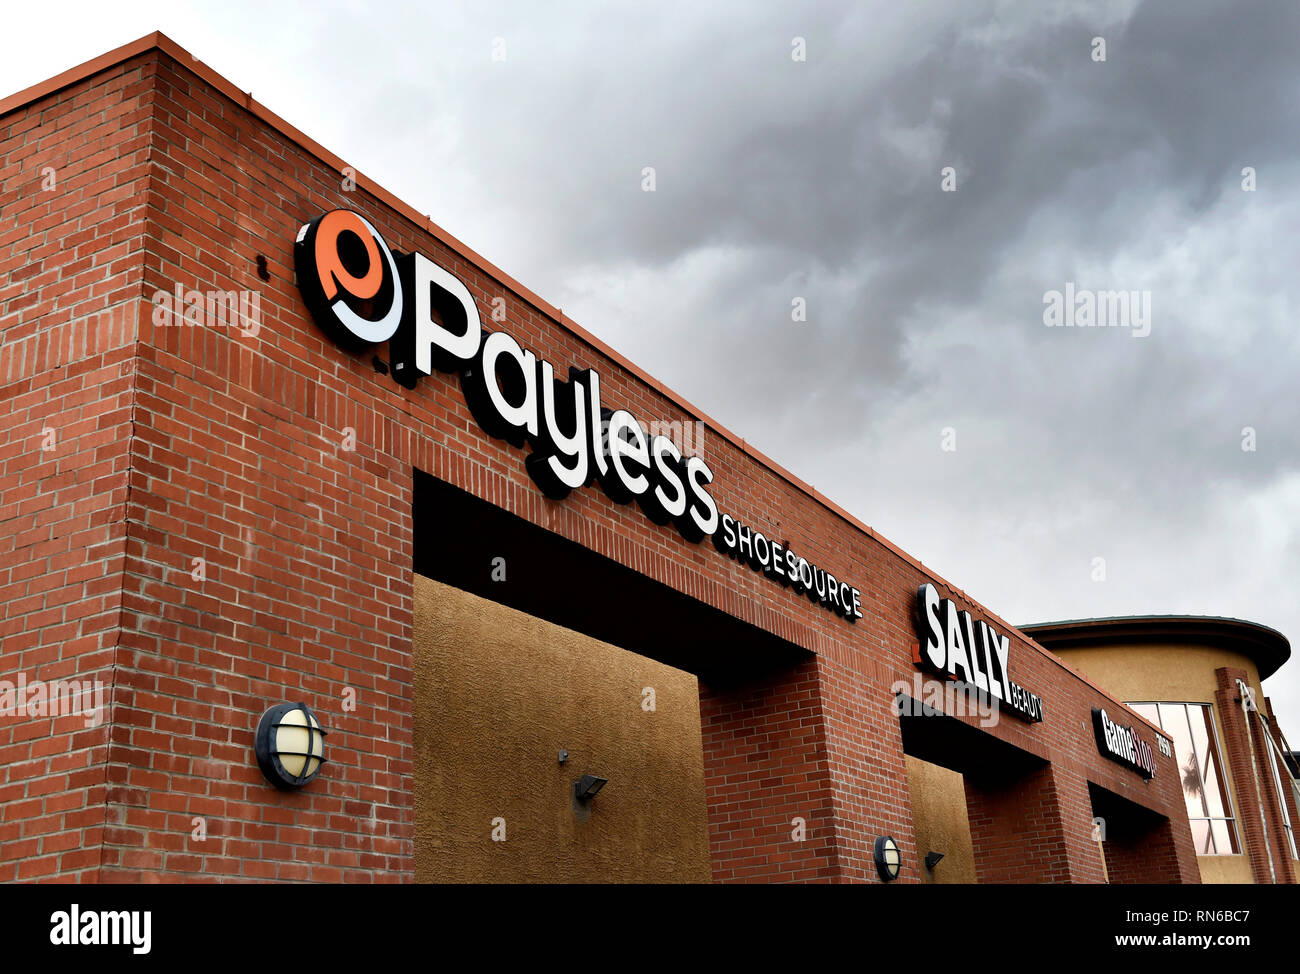 Las Vegas, Nevada, USA. 17th Feb, 2019. A Payless ShoeSource store is seen on February 17, 2019 in Las Vegas, Nevada. The Kansas based discount shoe store kicked off liquidation sales Sunday, attracting not only bargain shoppers but longtime fans of the store, which confirmed Friday it is ceasing all operations in the U.S. and Puerto Rico. Credit: David Becker/ZUMA Wire/Alamy Live News Stock Photo